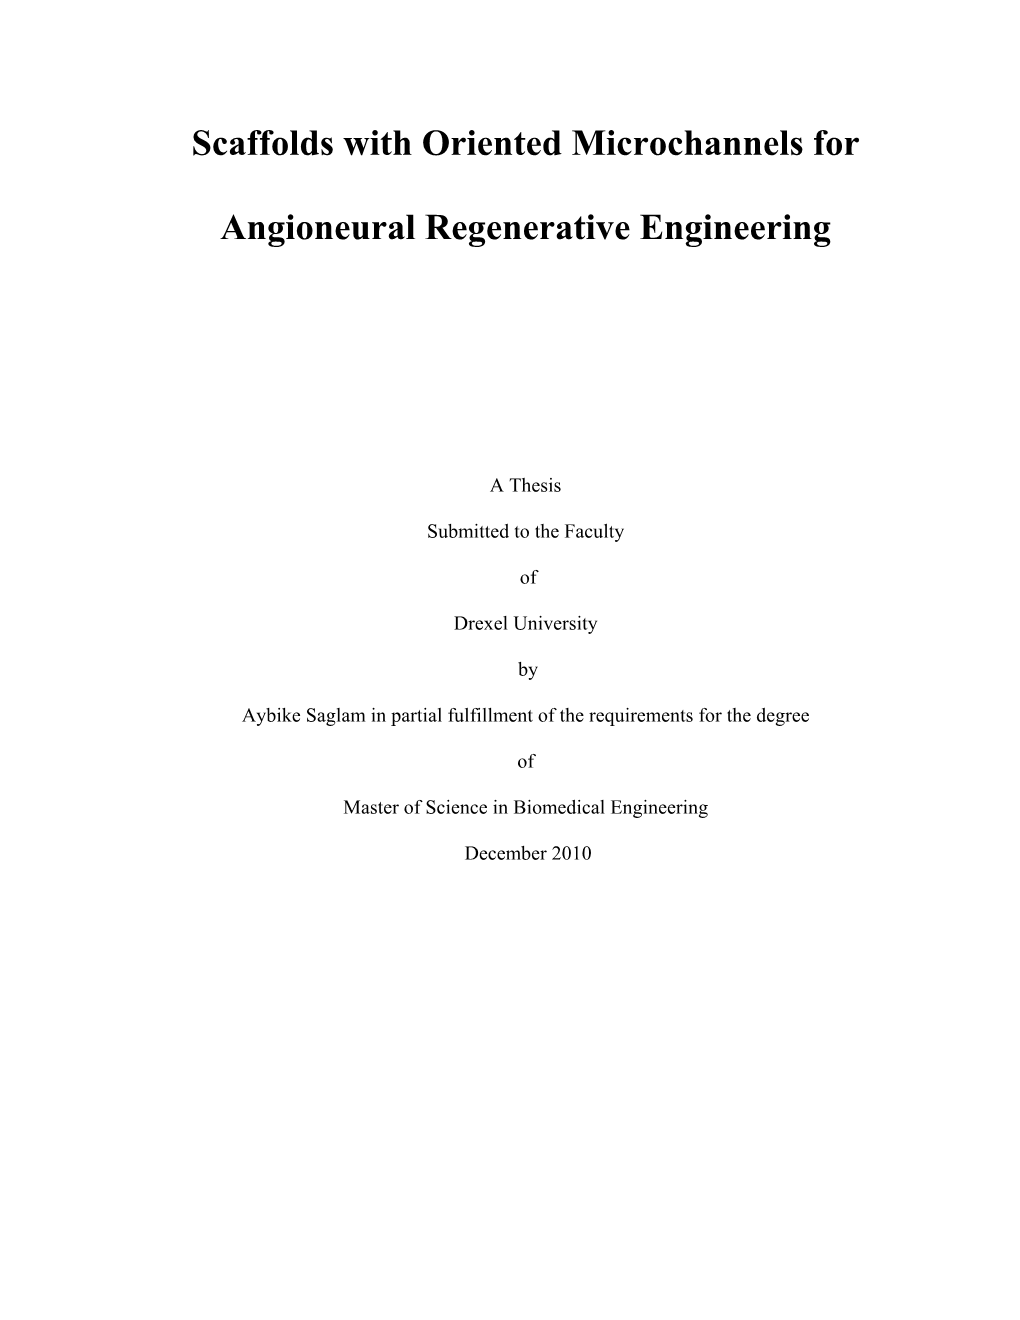 Scaffolds with Oriented Microchannels for Angioneural Regenerative Engineering By